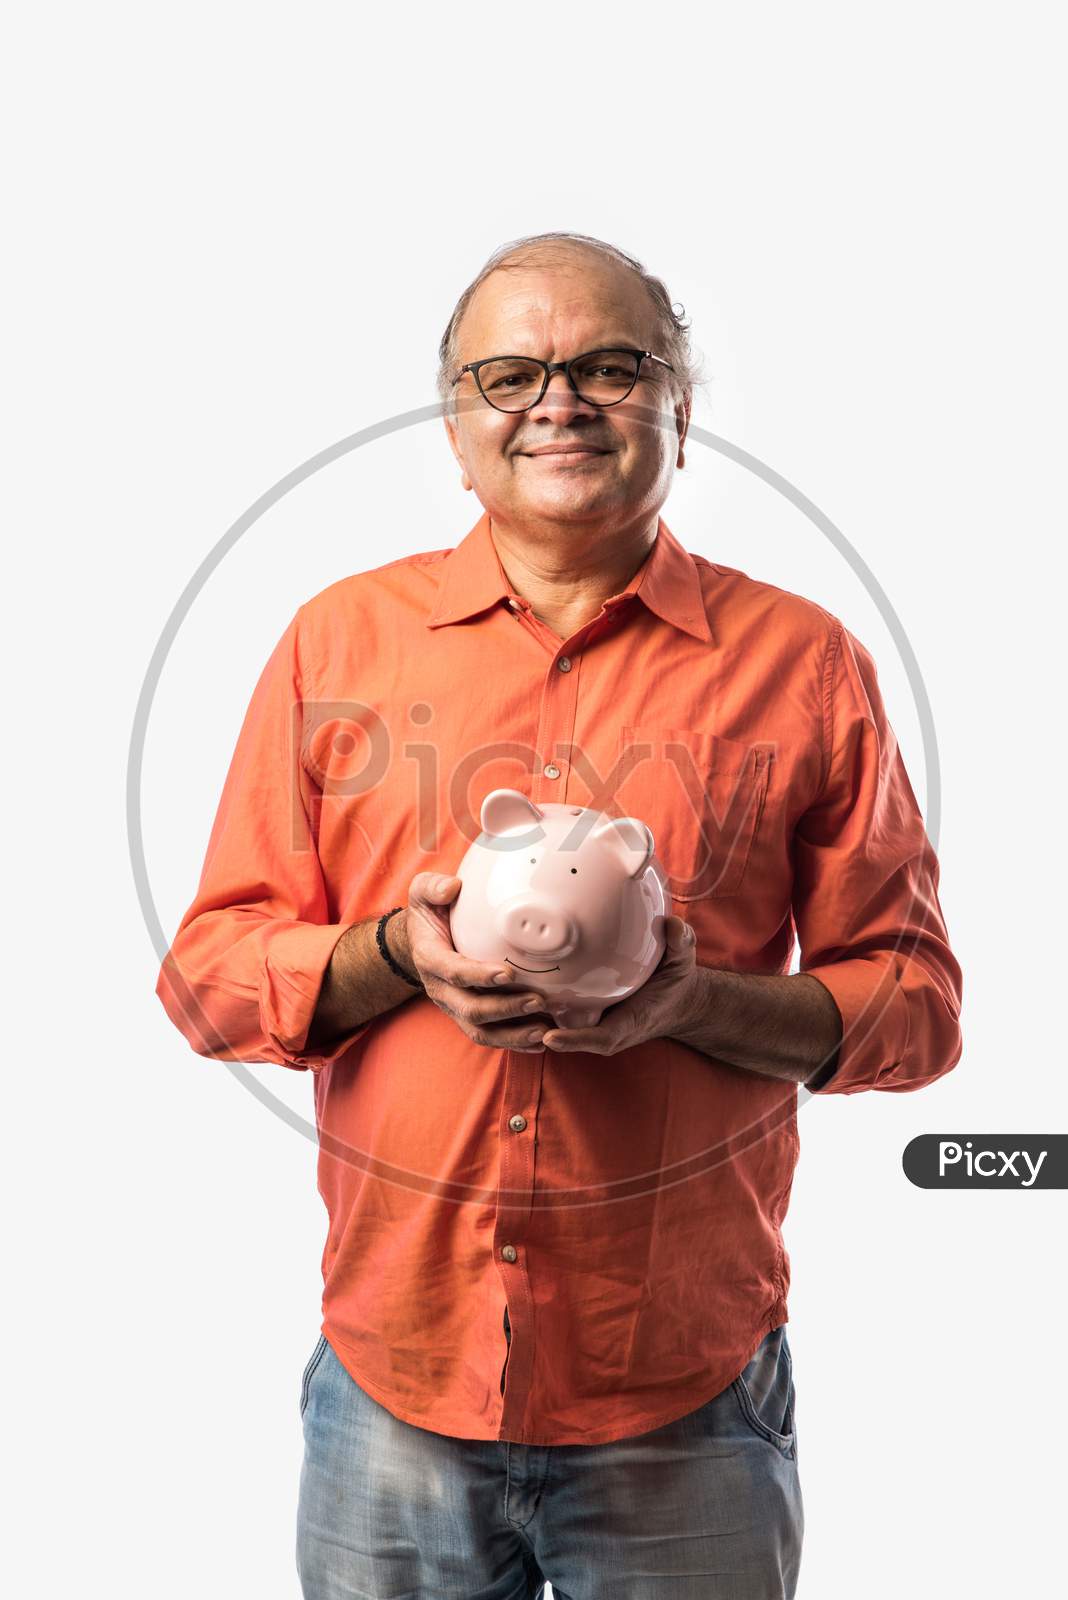 Indian Old Man Or Retired Senior Male Adult Holding Piggy Bank Or Money Box